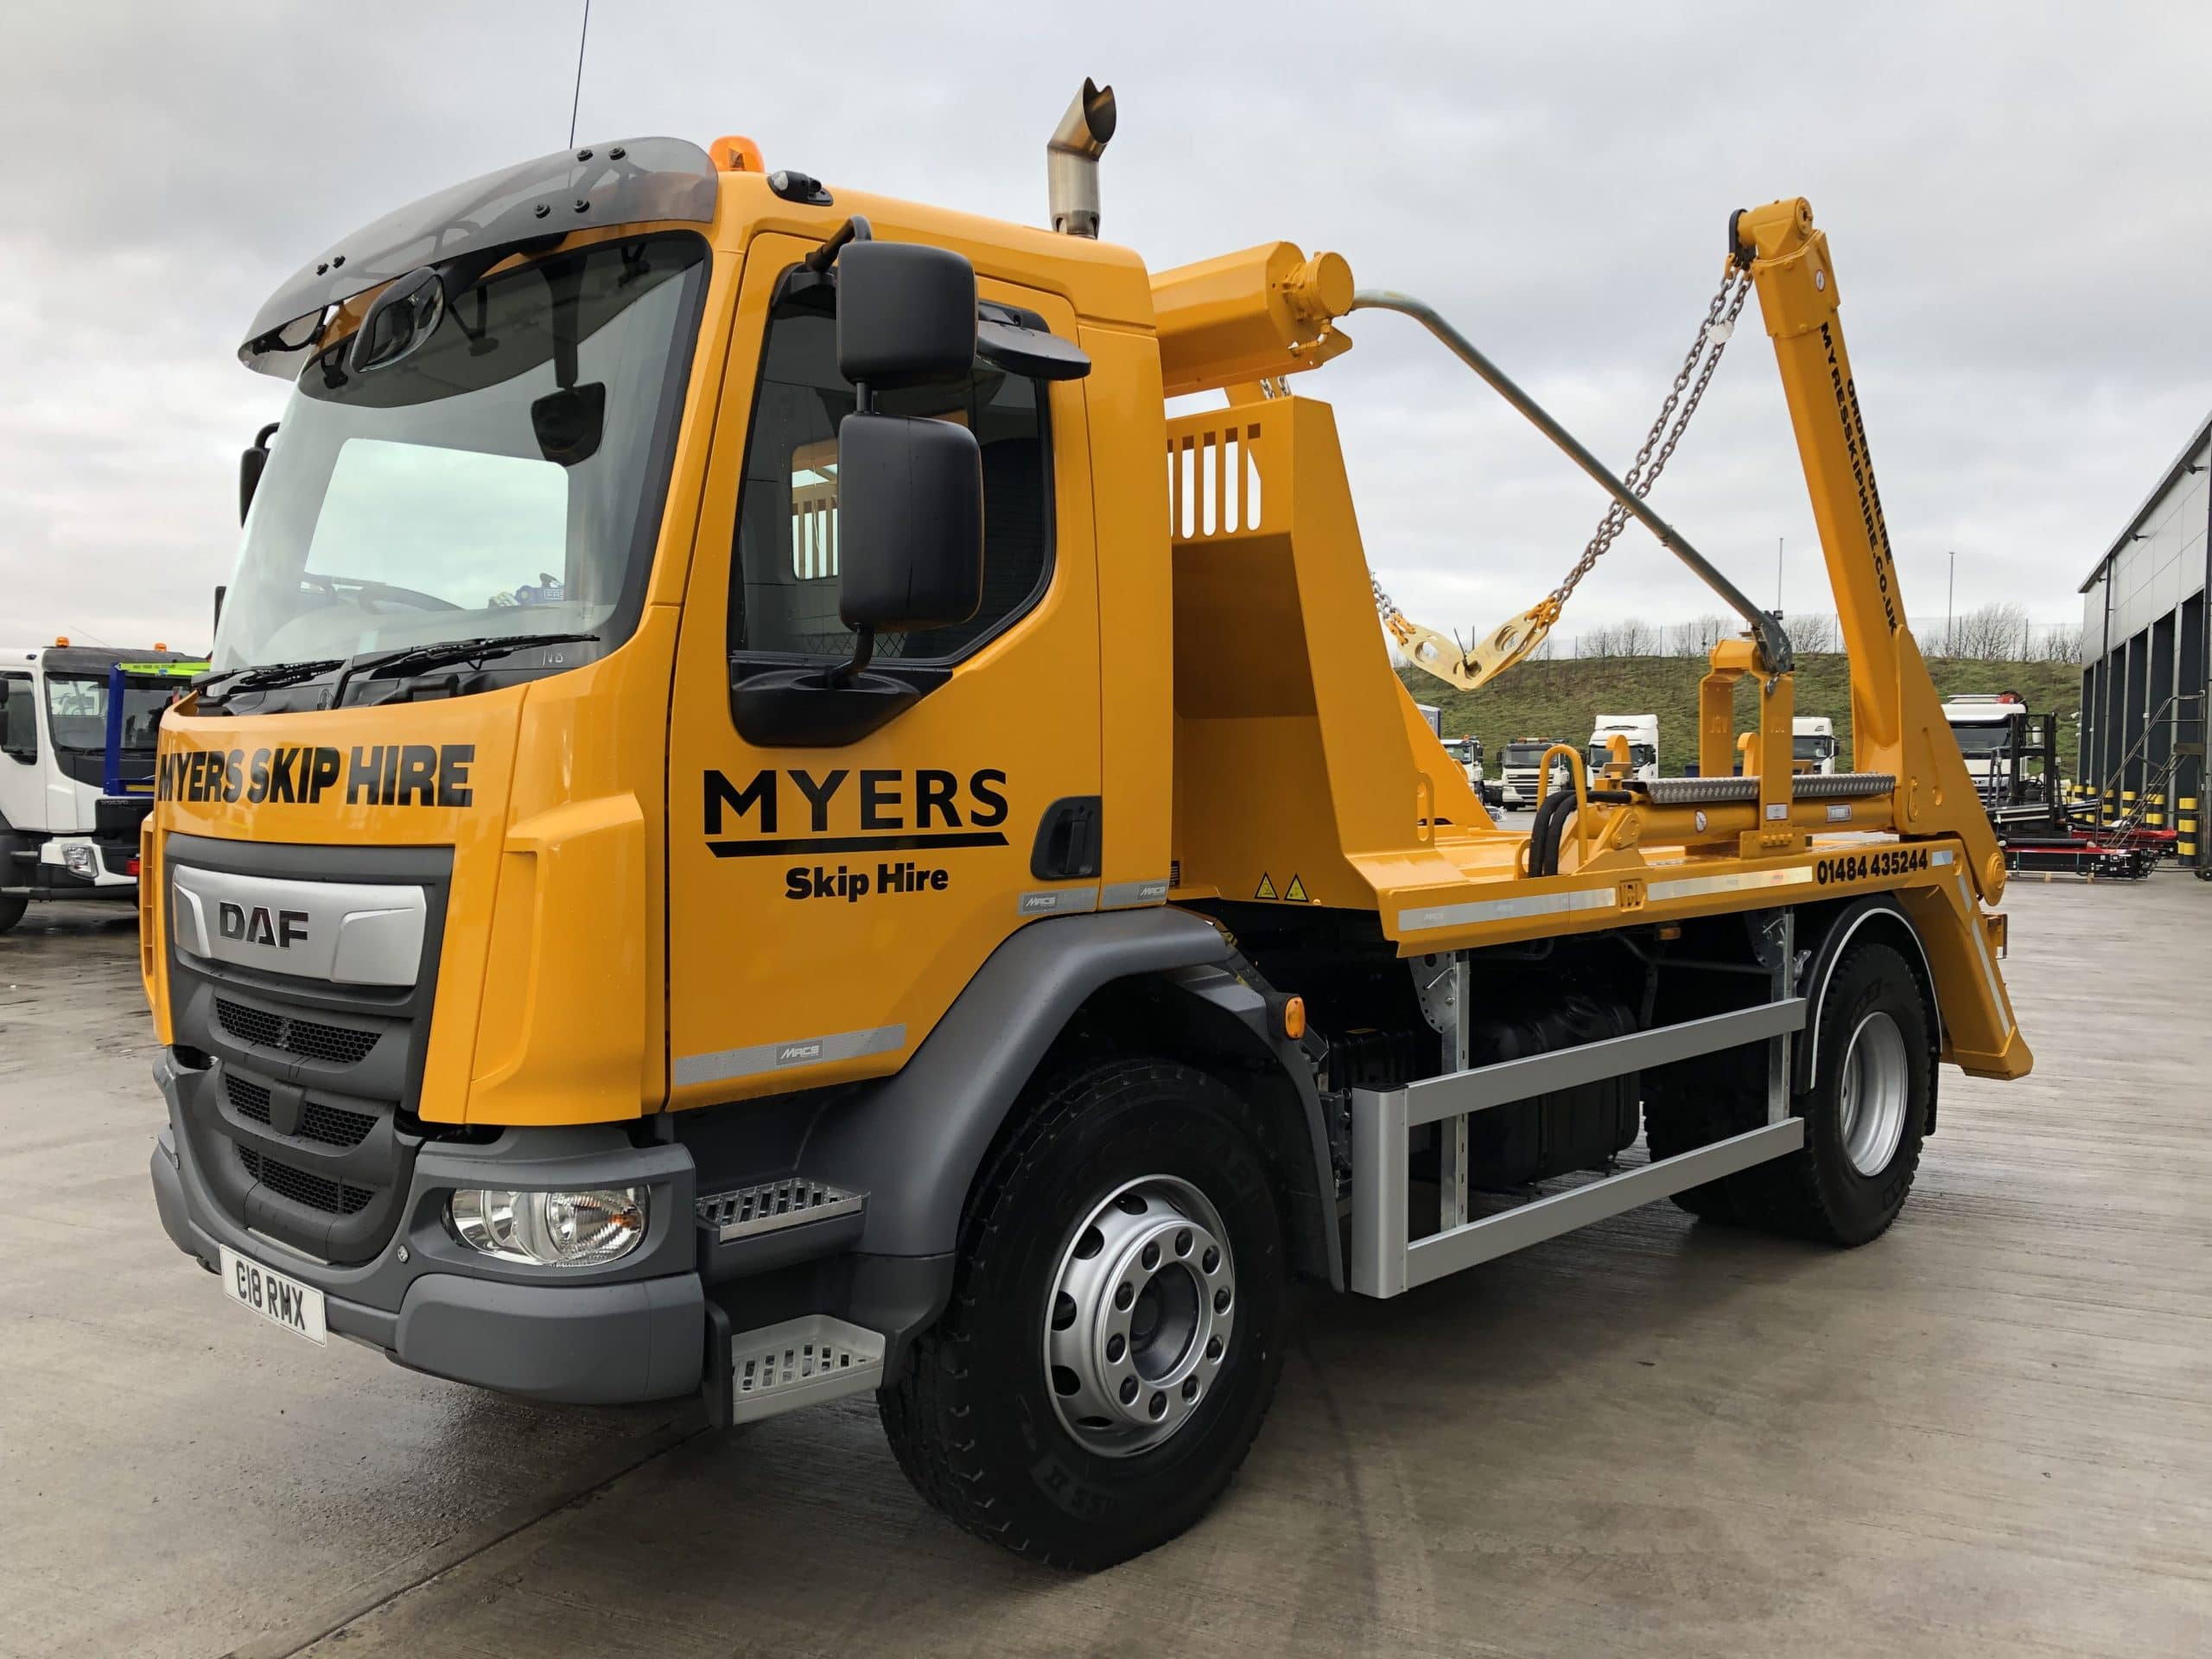 Local Company, Myers Skip Hire Take First Vehicle